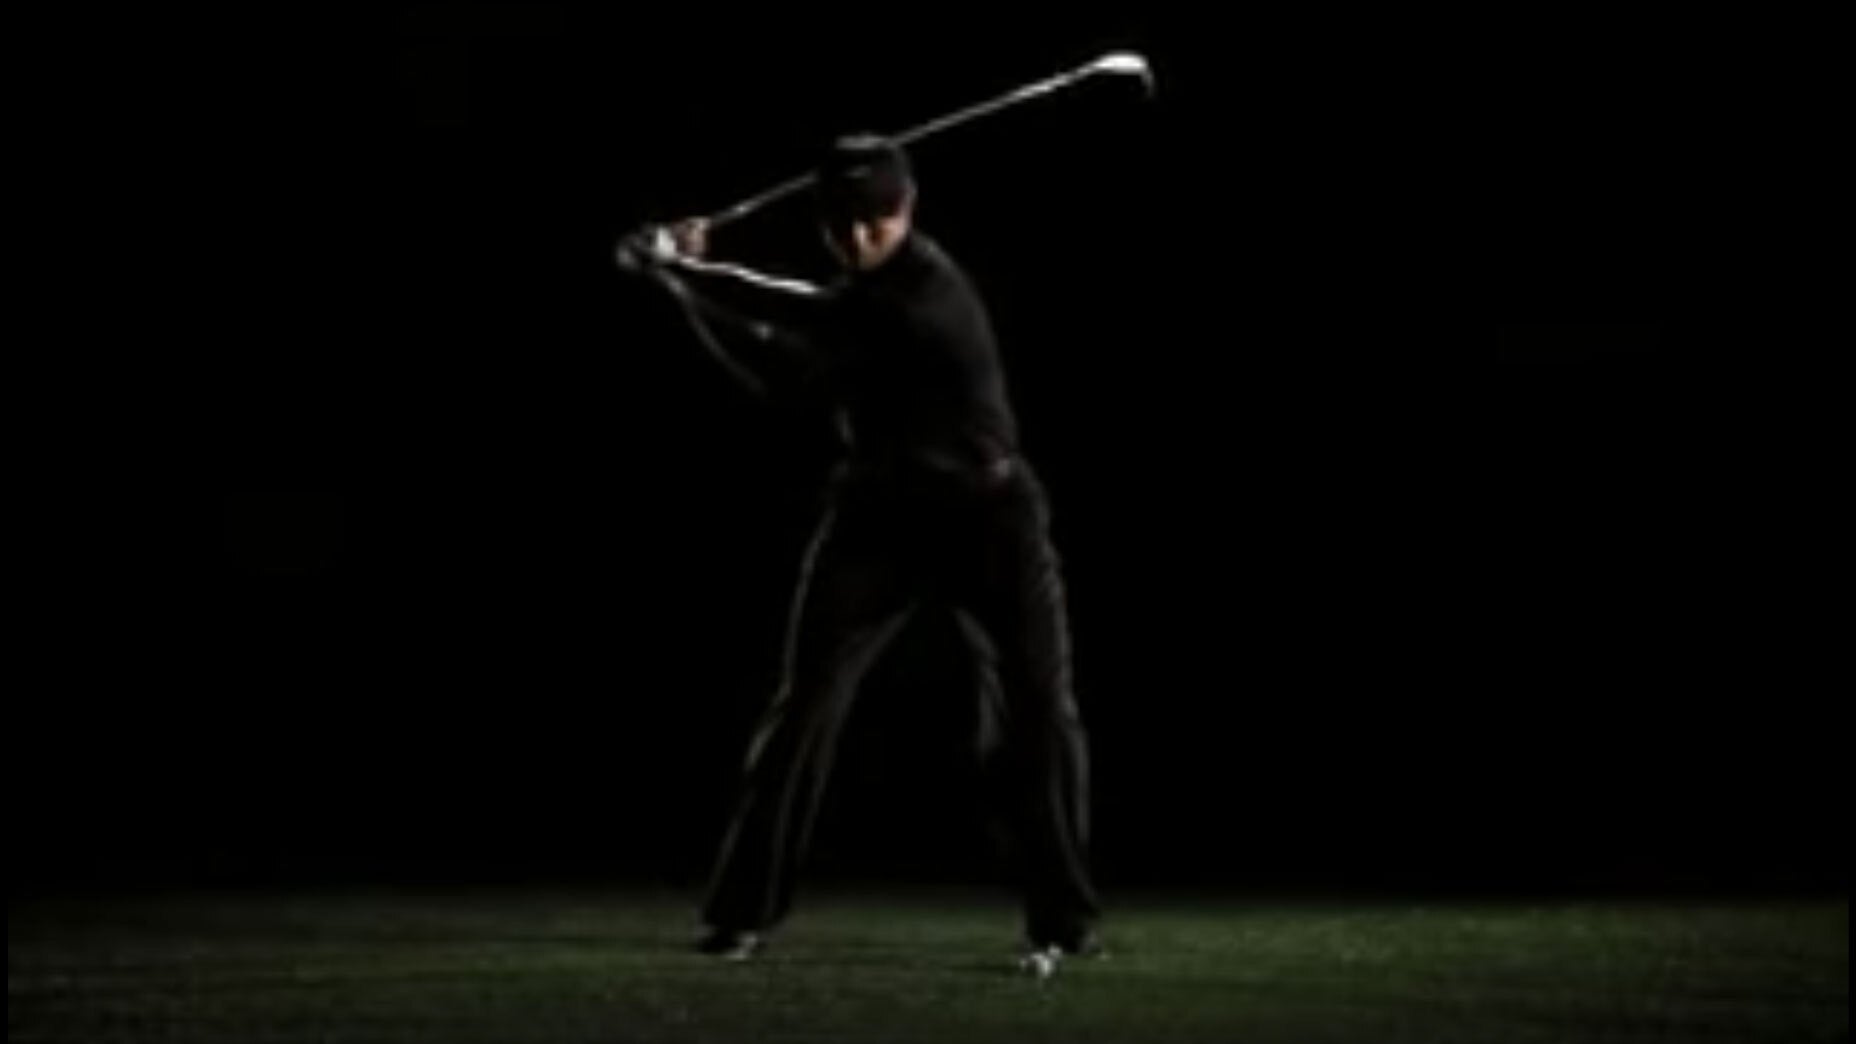 new tiger nike commercial